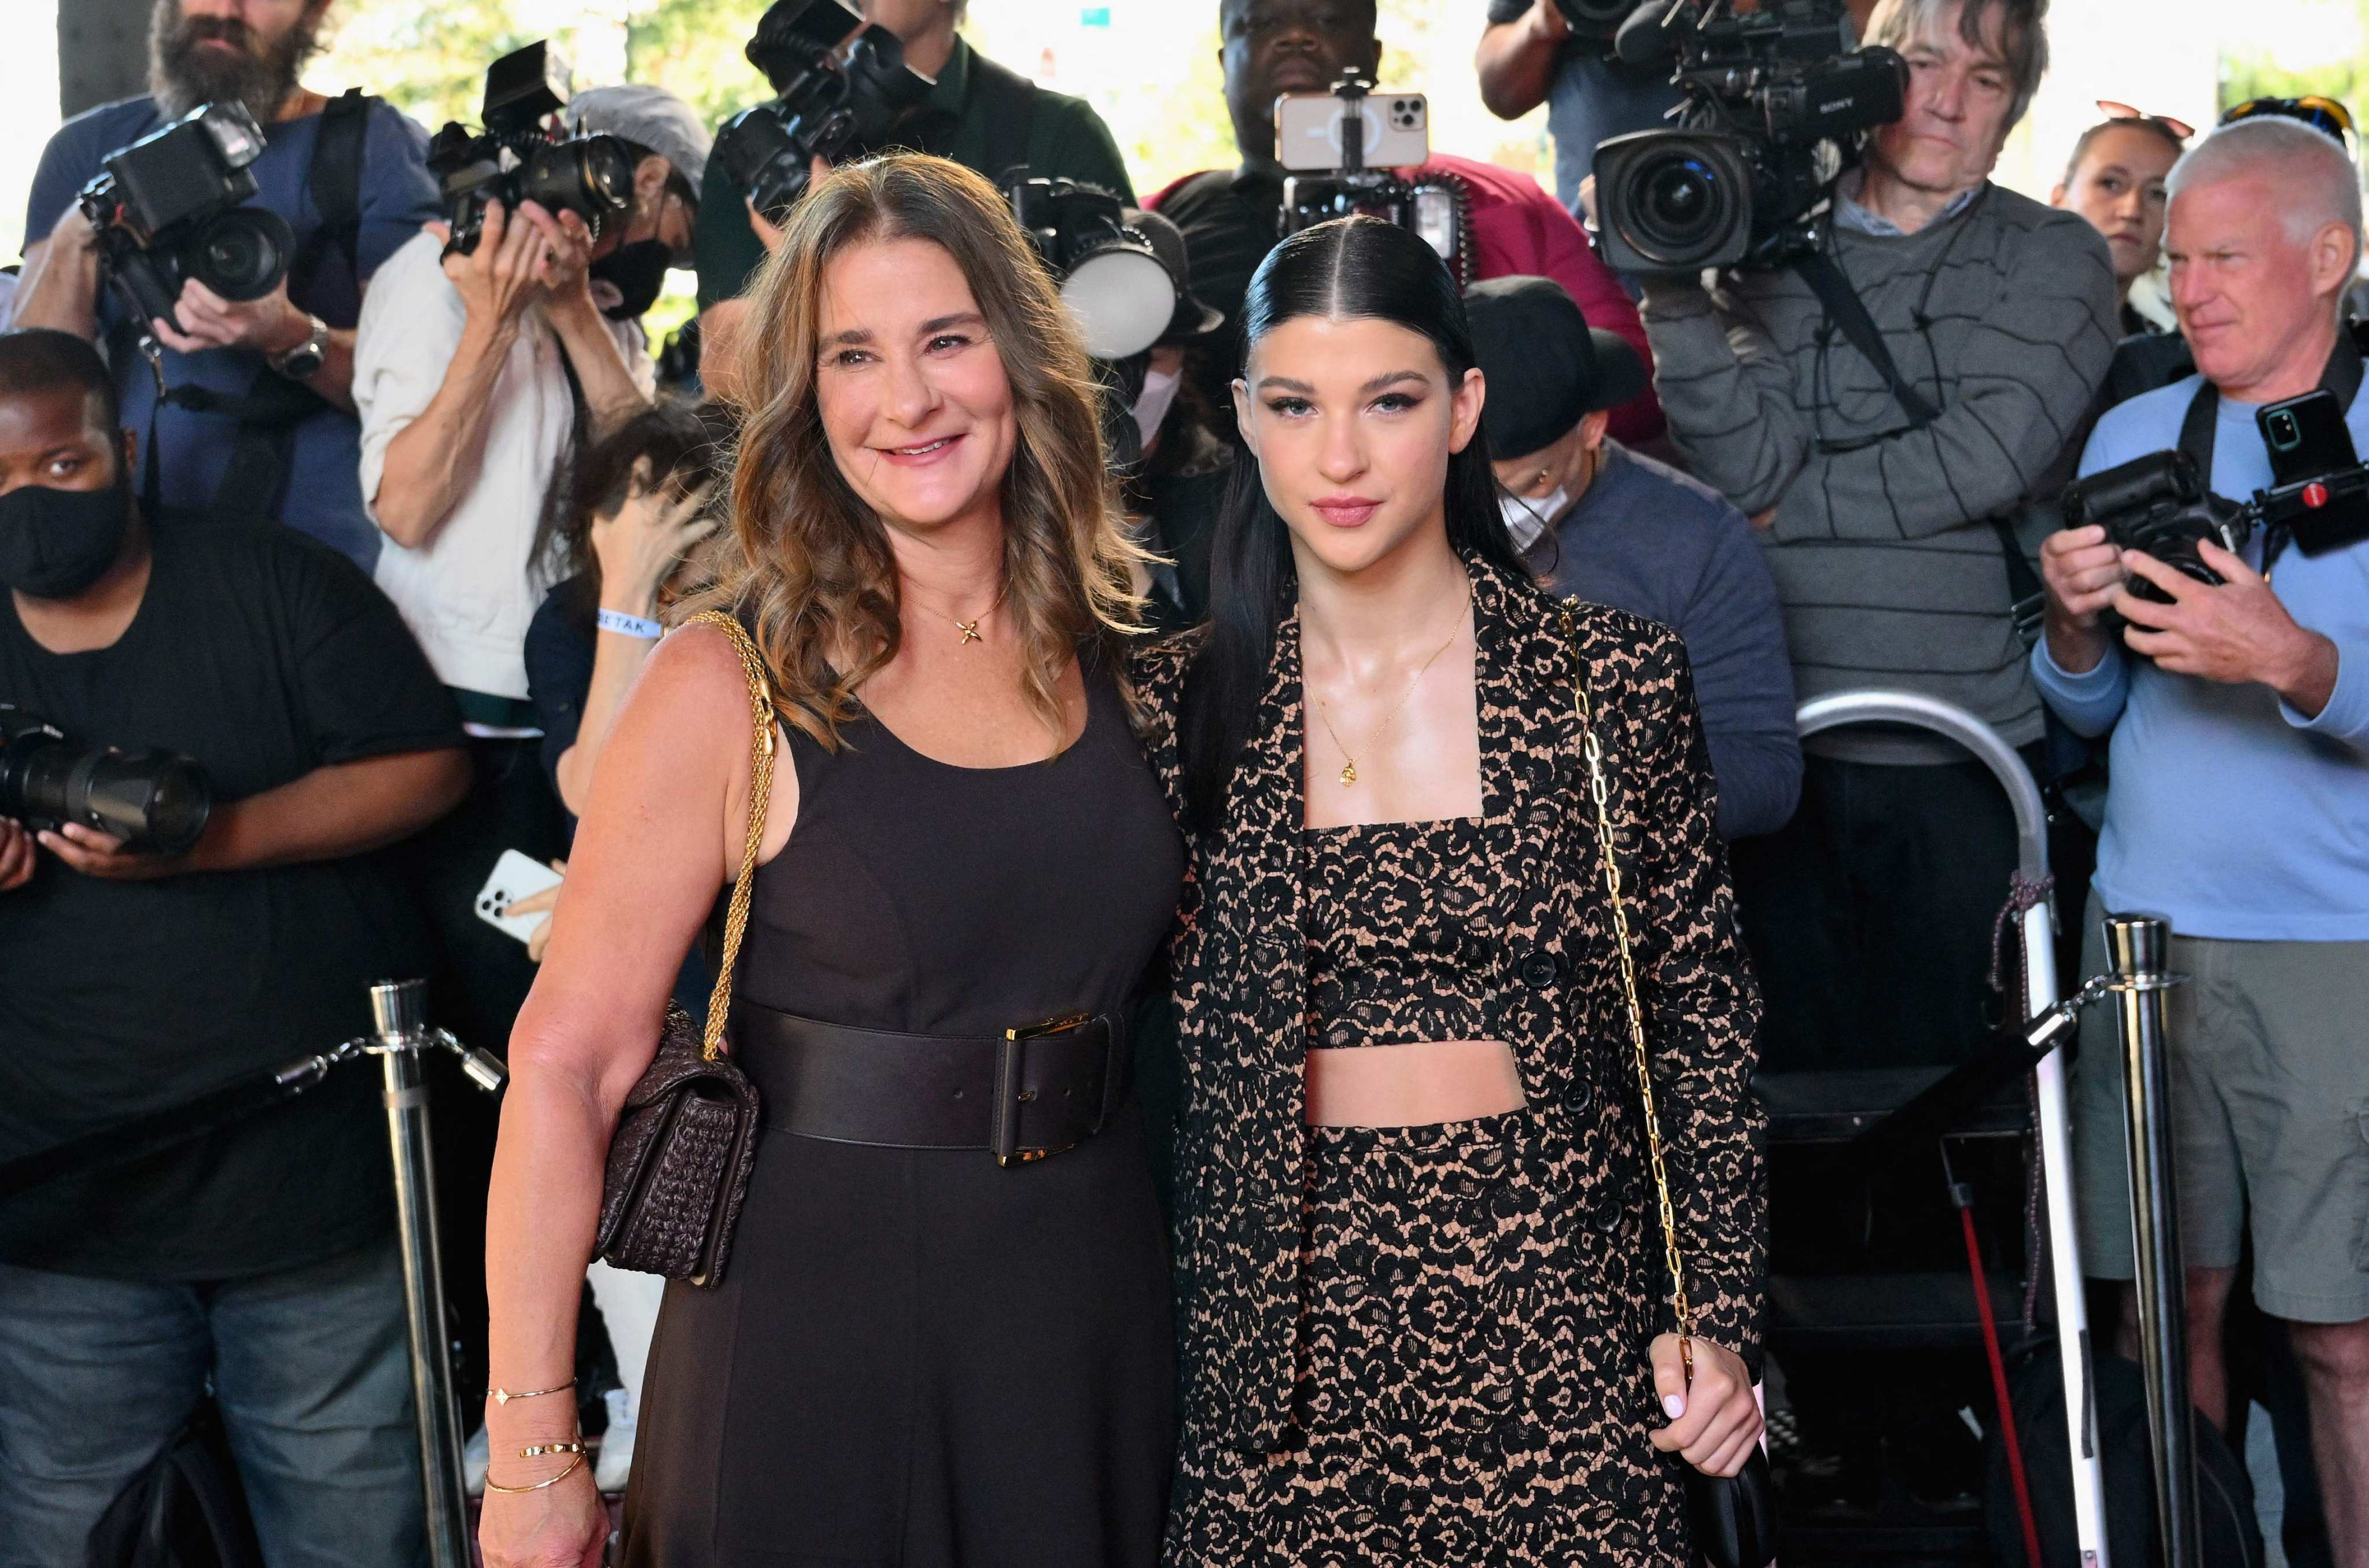 Melinda Gates and Phoebe Gates at the Michael Kors show during New York Fashion Week. Phoebe was one of five notable new faces among the celebrity children at fashion week shows, either in the front row or on the runway. Photo: AFP